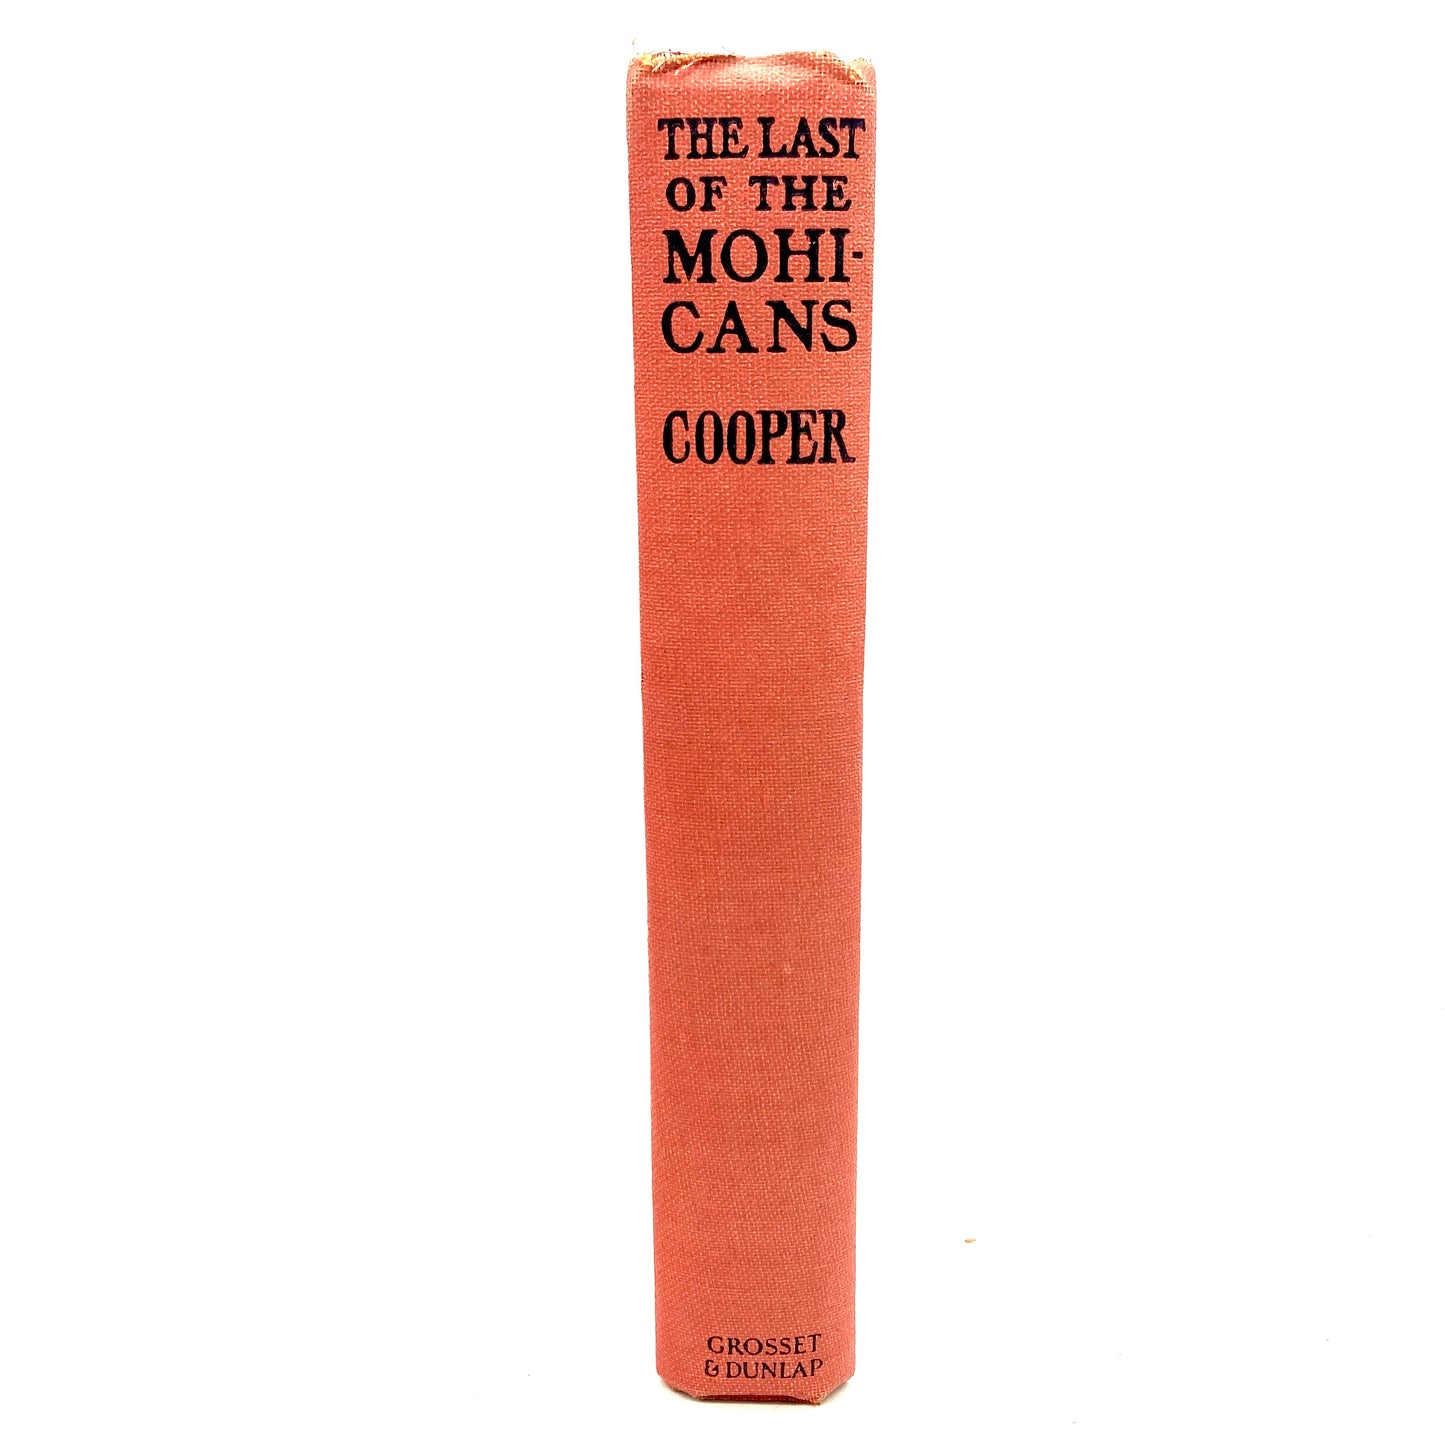 COOPER, James Fenimore "The Last of the Mohicans" [Grosset & Dunlap, c1942]